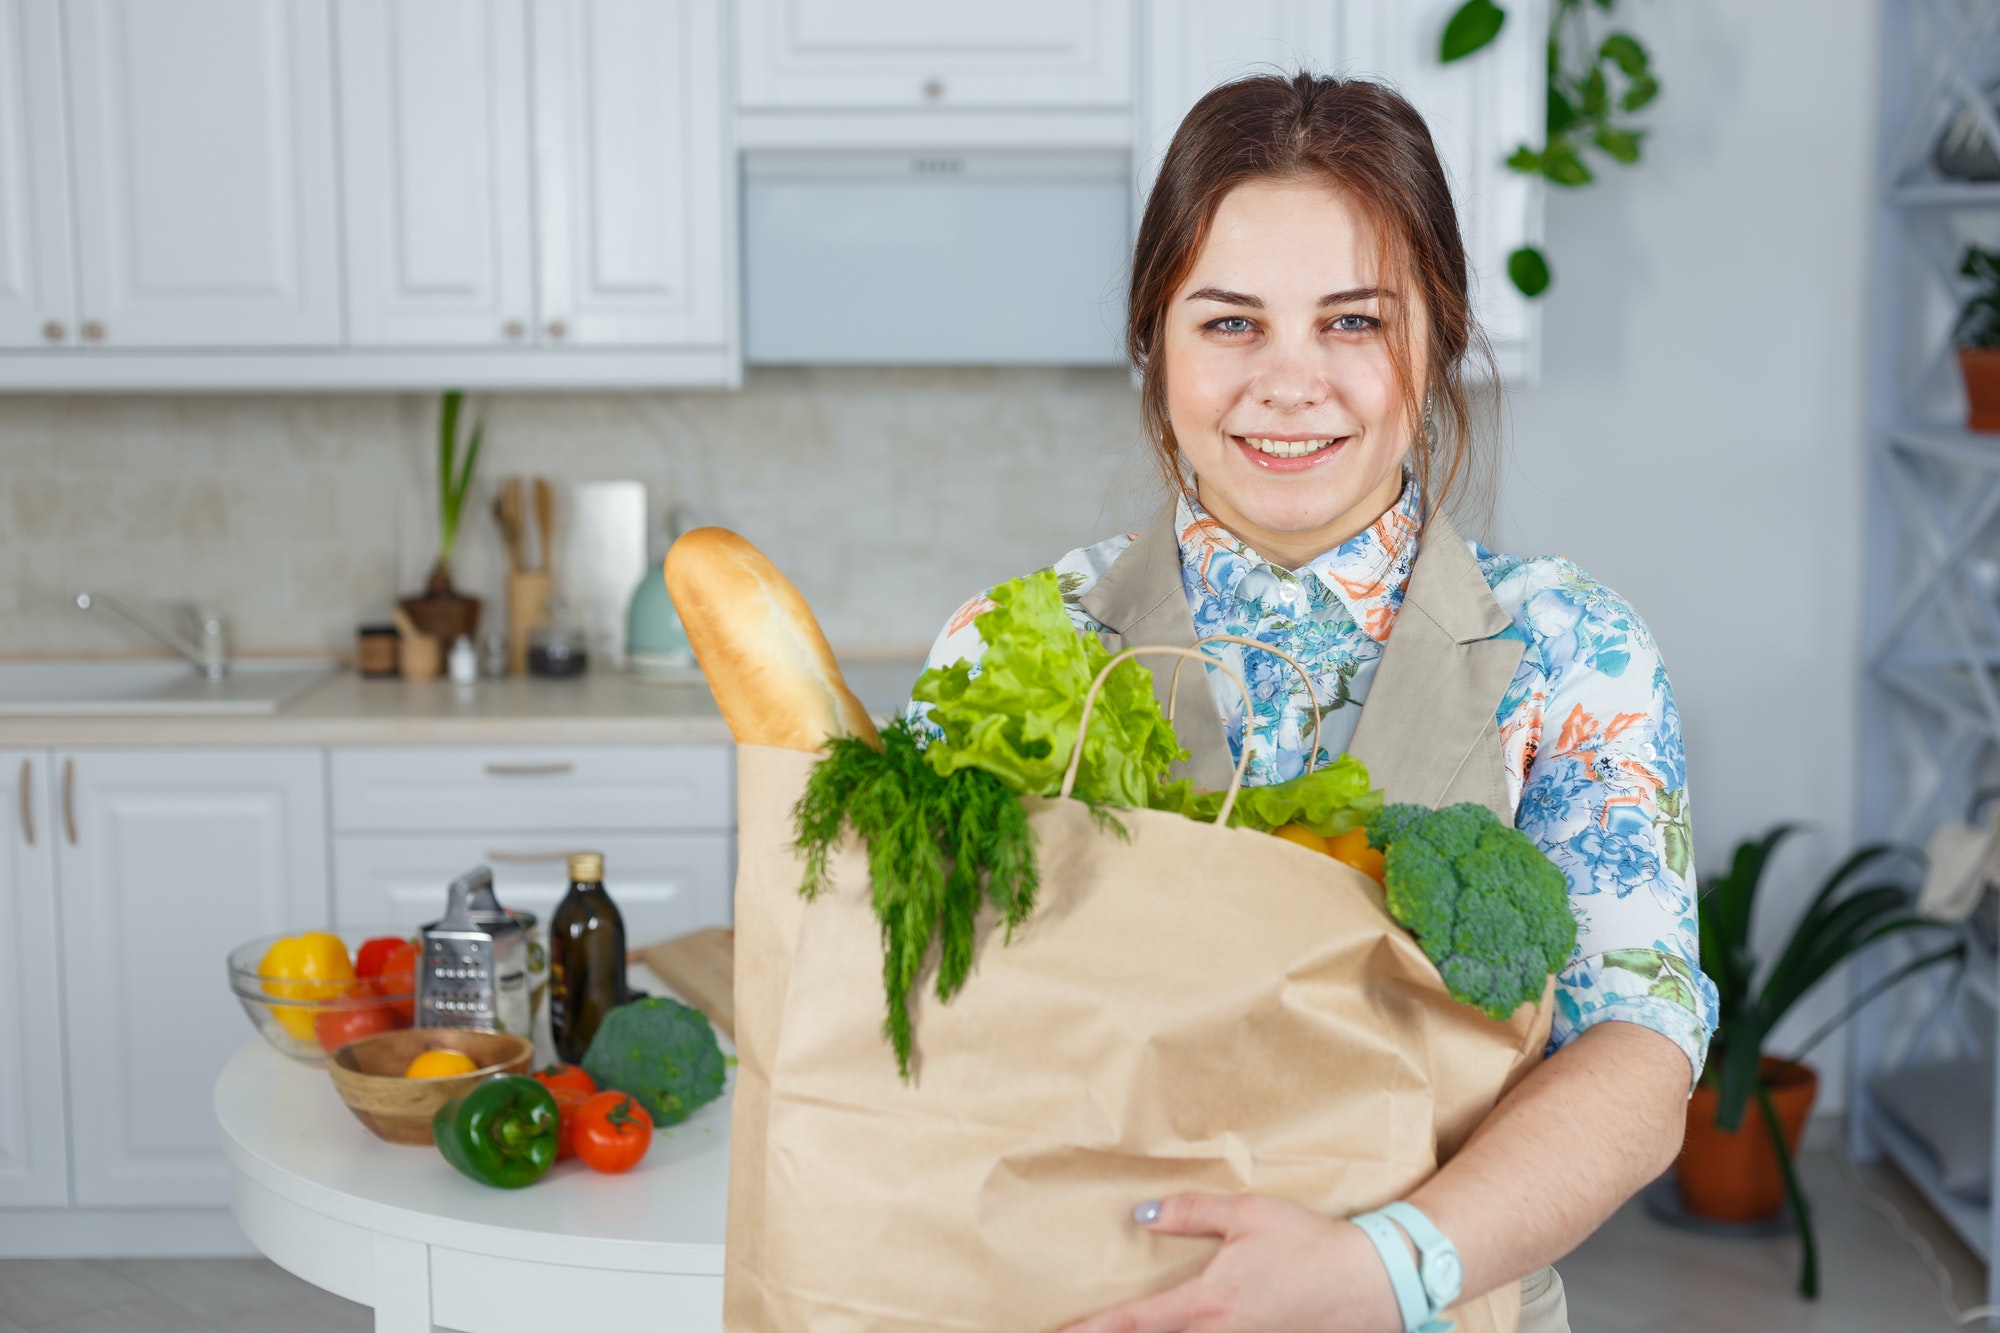 Smiling woman in the kitchen with a bag of groceries shopping